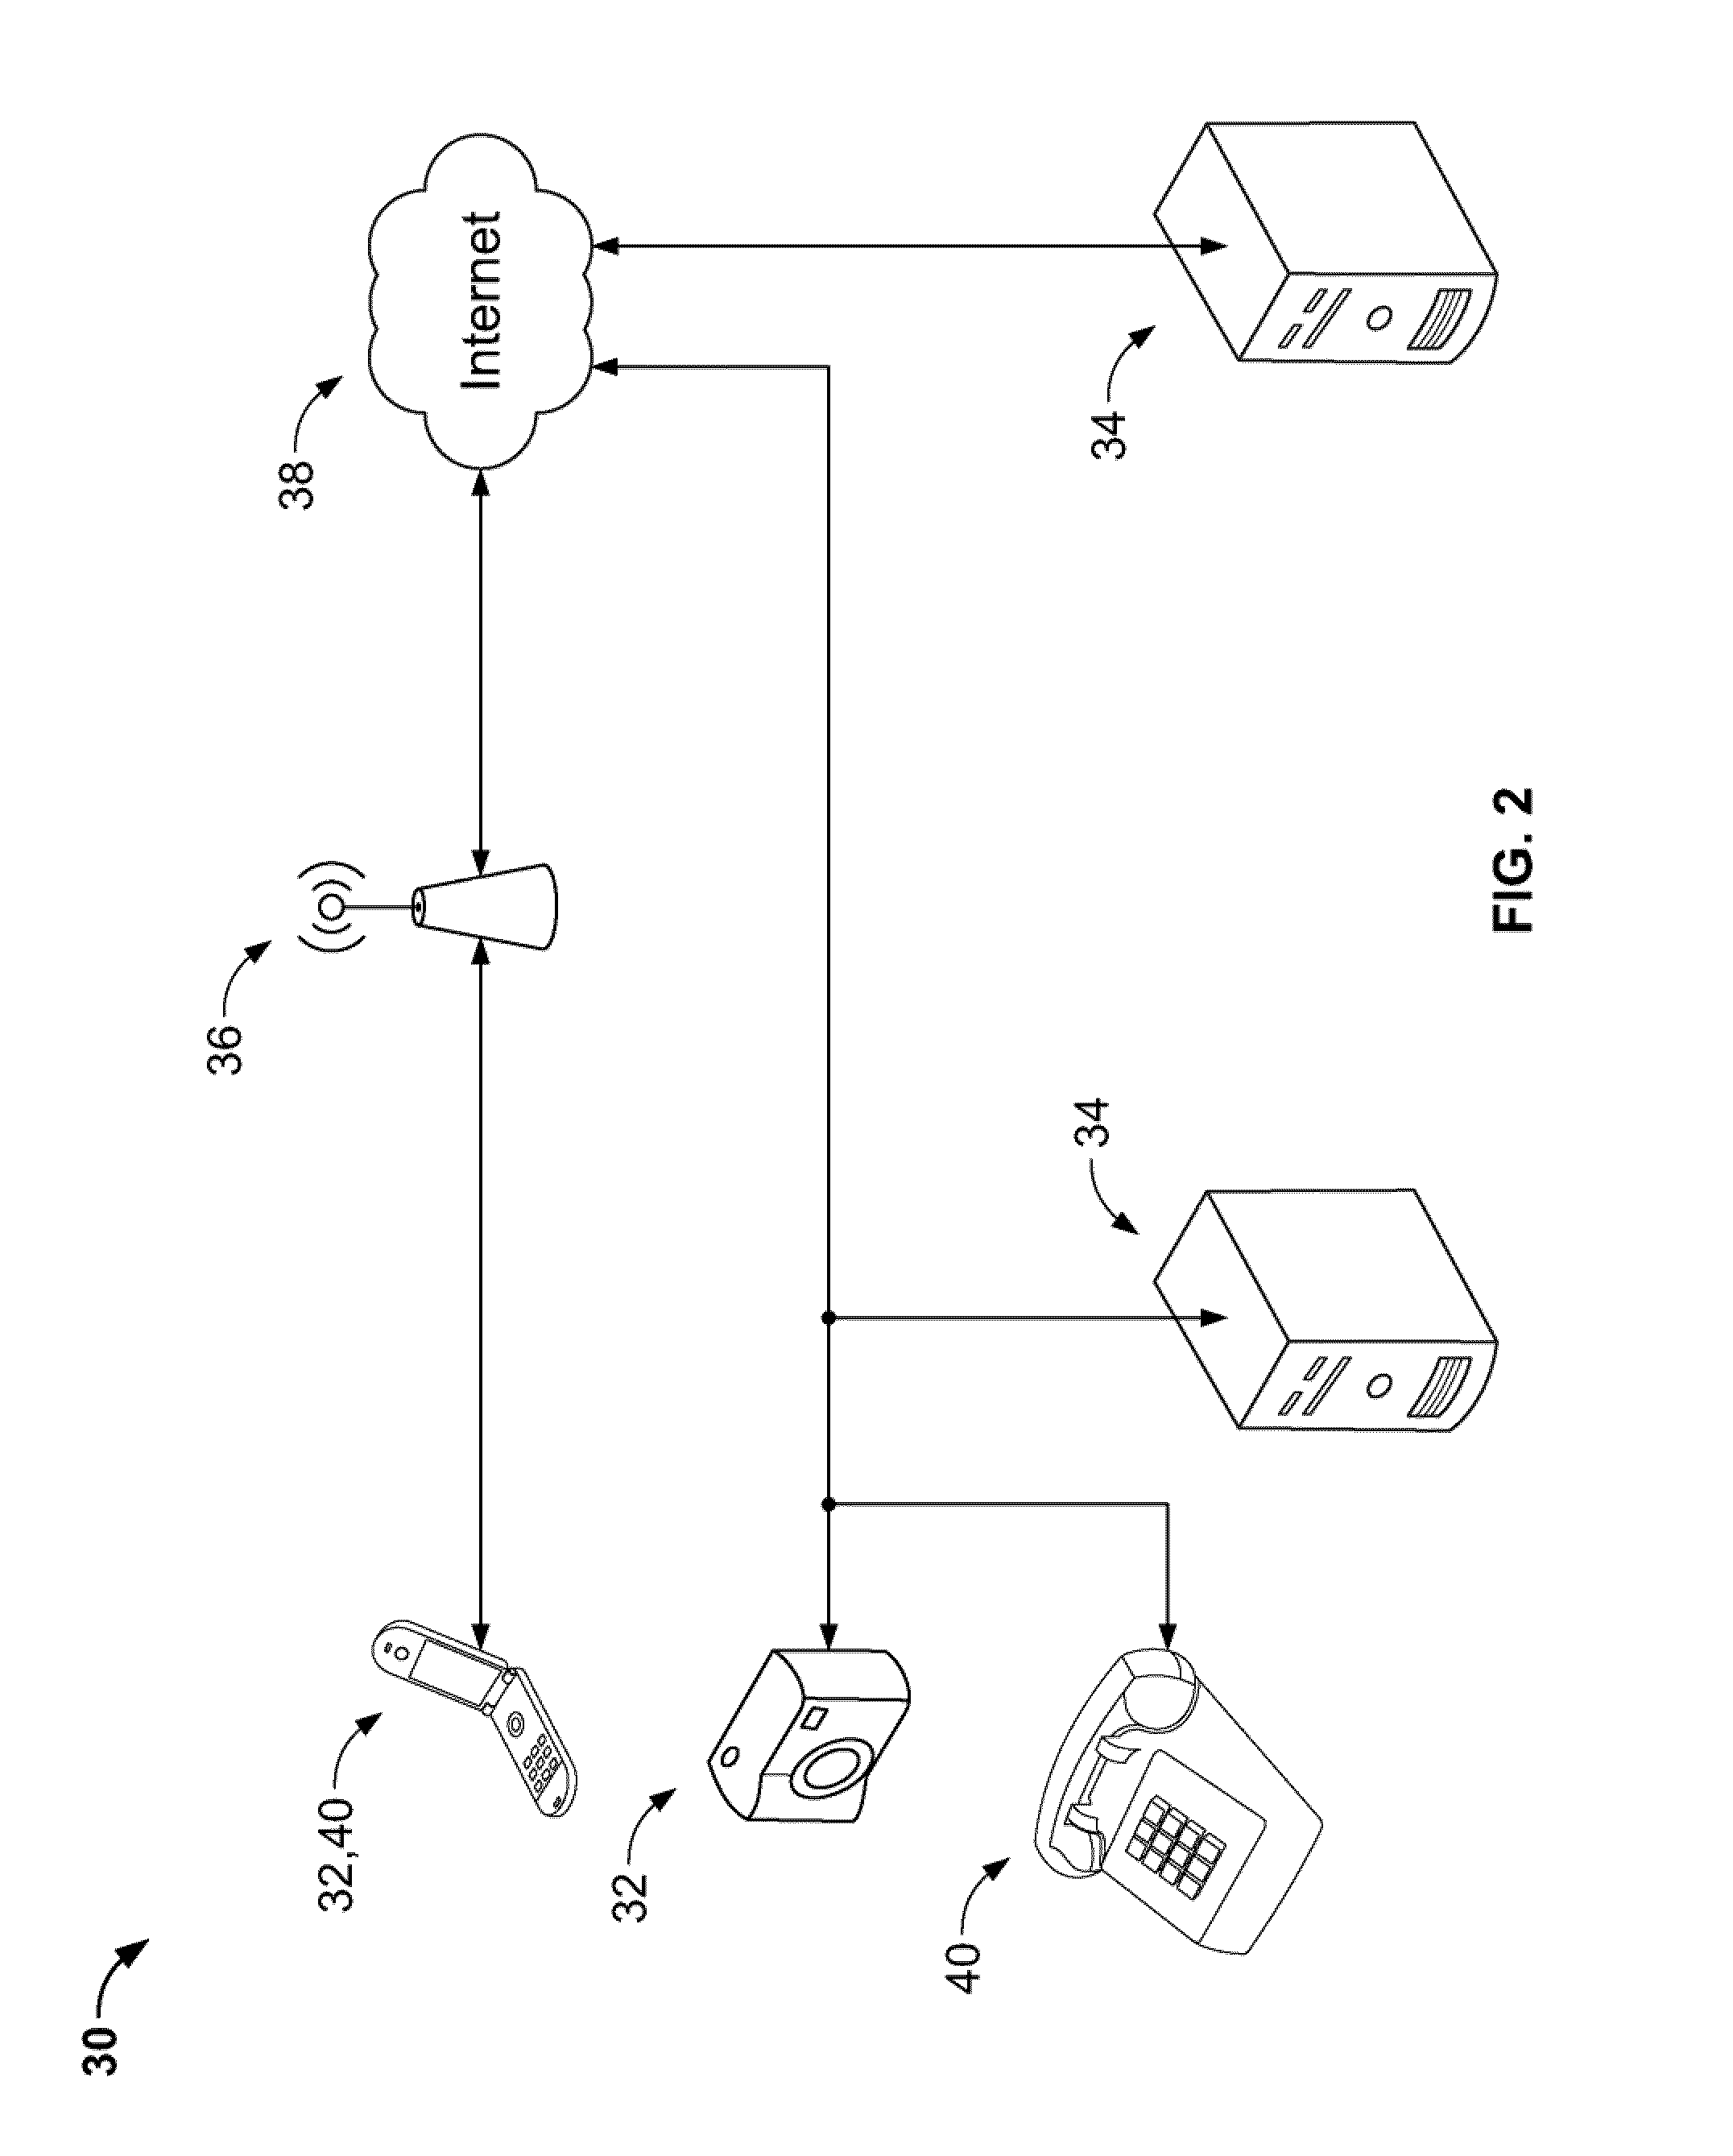 Food recognition using visual analysis and speech recognition